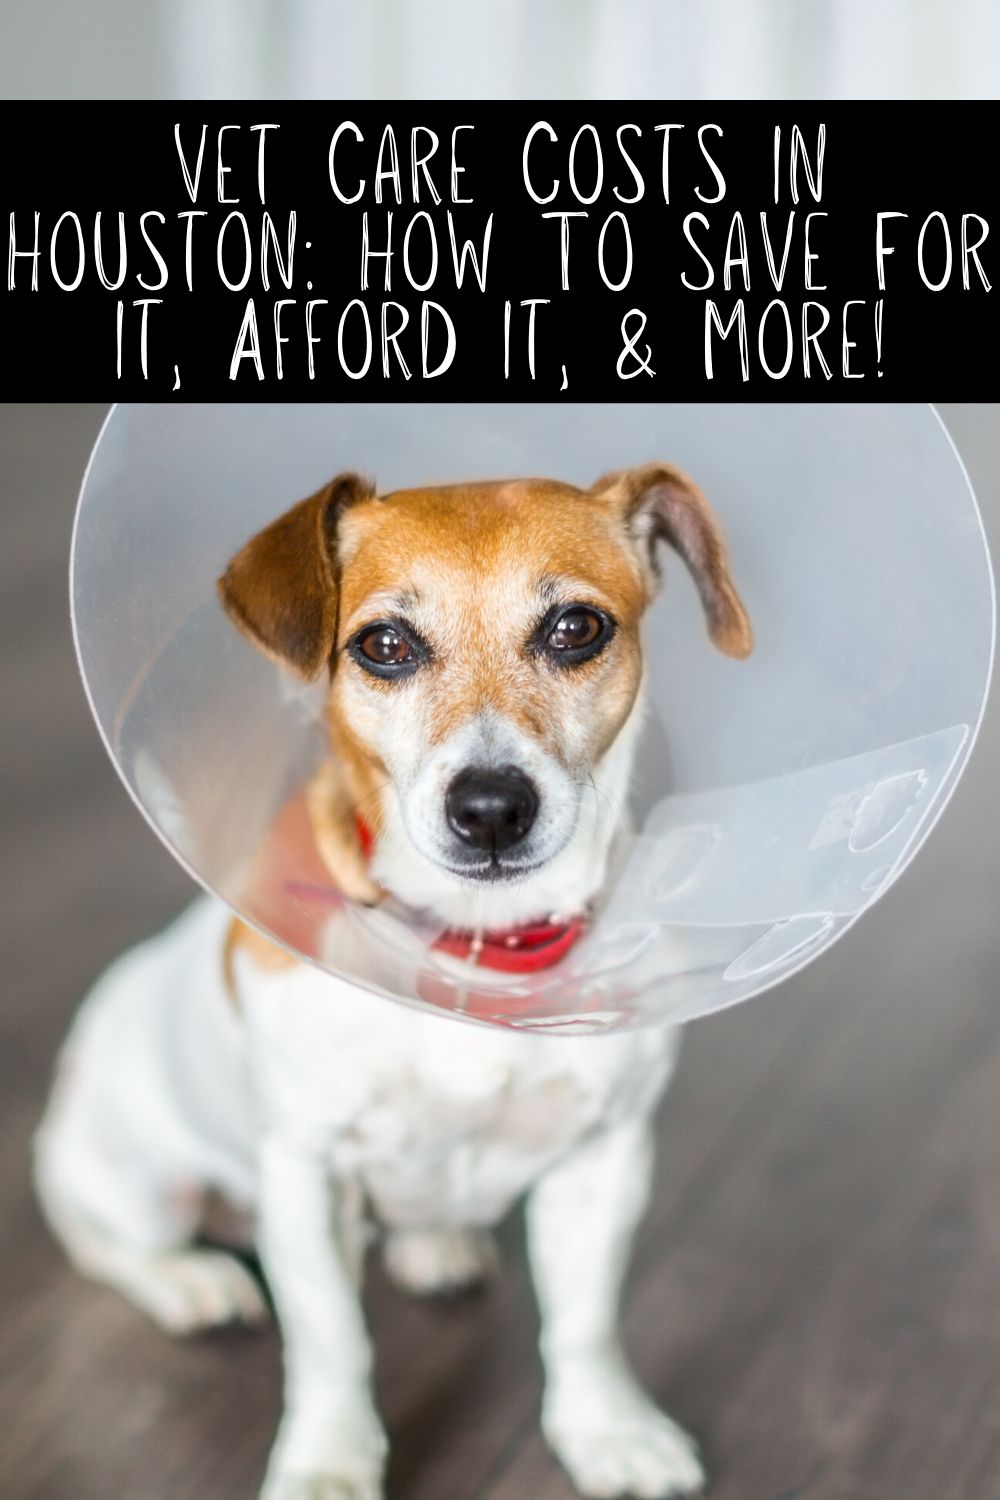 Vet care costs in Houston don't have to be overwhelming. There are ways to prepare for vet care costs and we're going to walk you through it today! Also check out some of the great Houston veterinarian choices below for all of your pet care needs.